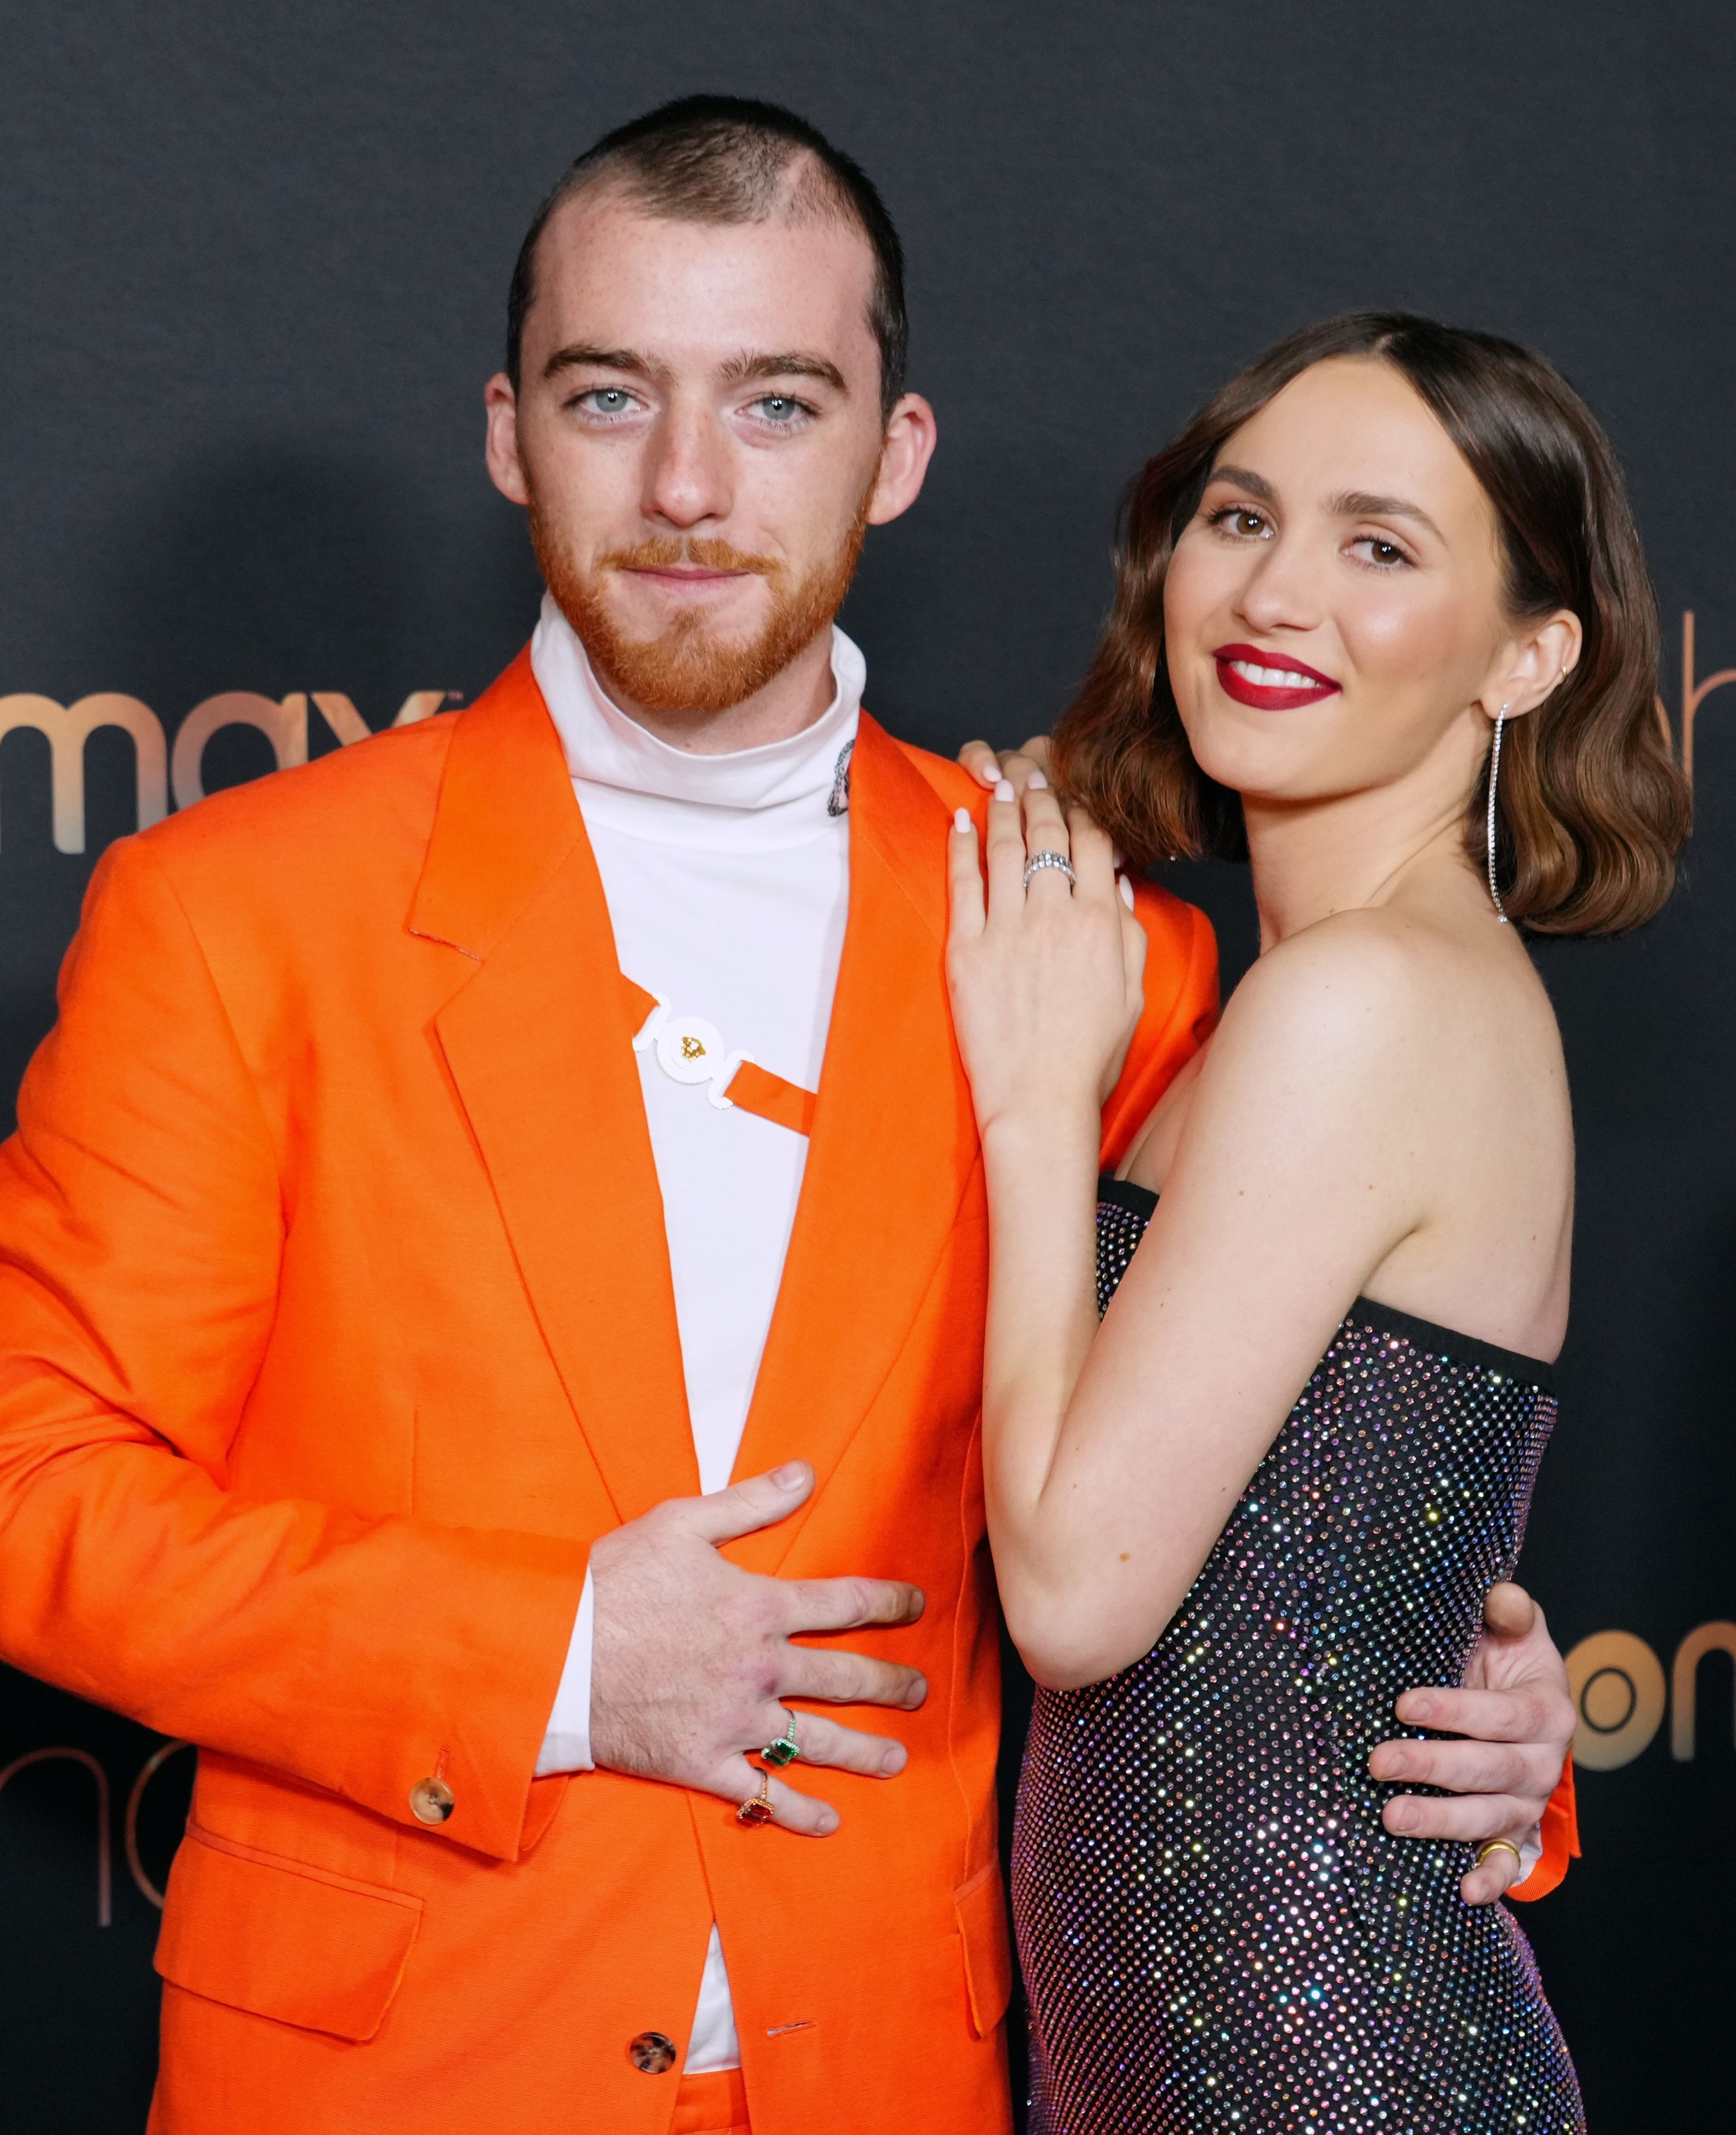 Angus and Maude embracing on the red carpet